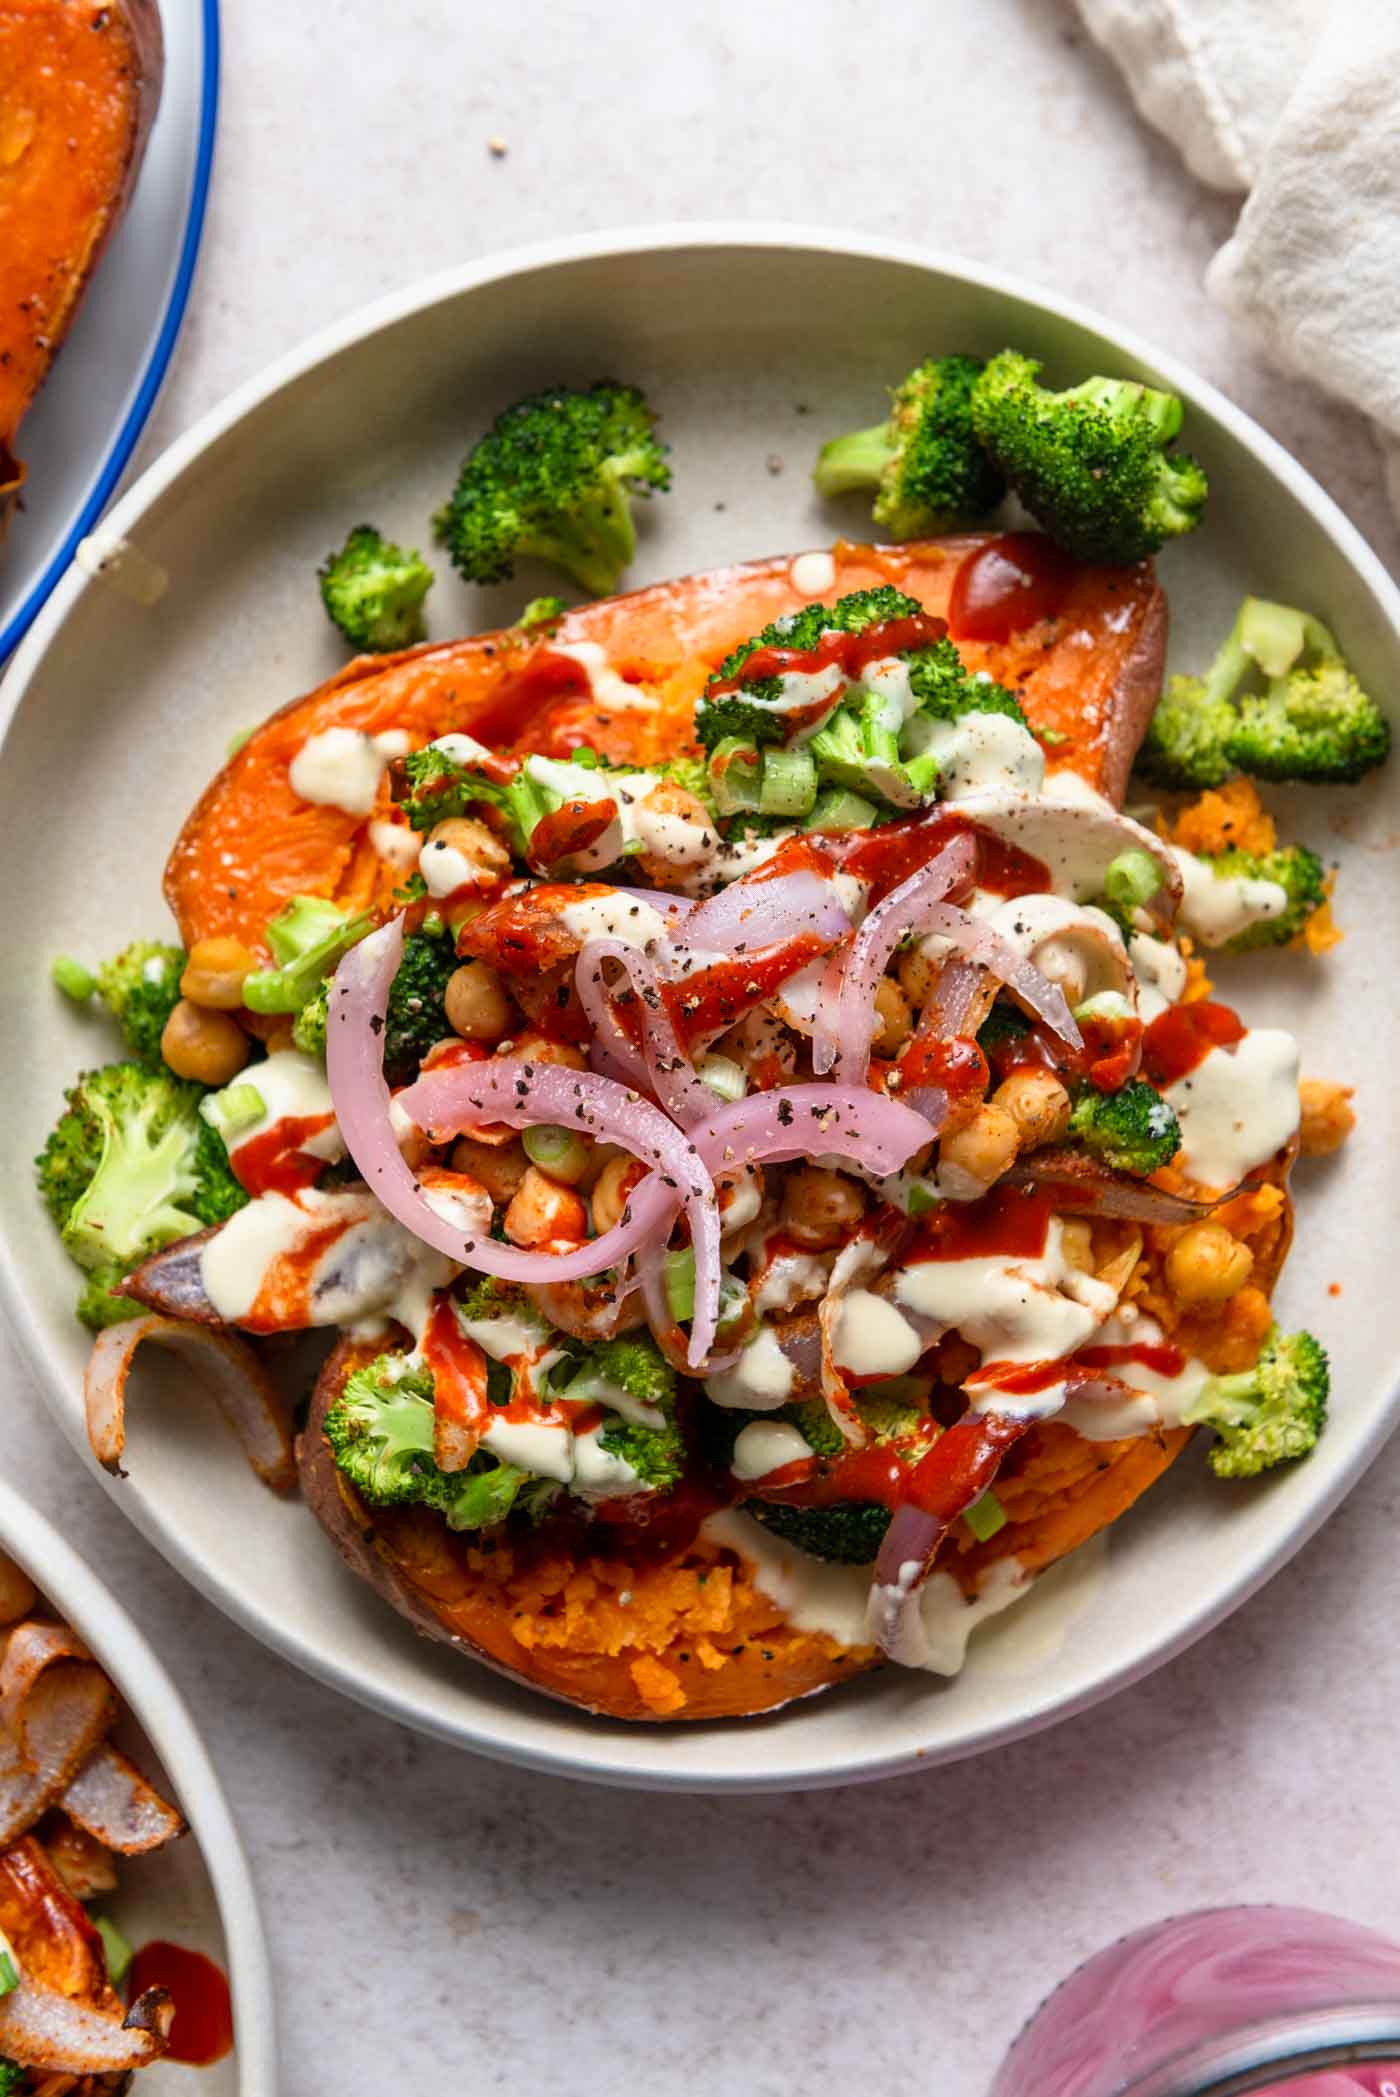 Baked sweet potato topped with chickpeas, broccoli, red onion and tahini sauce.